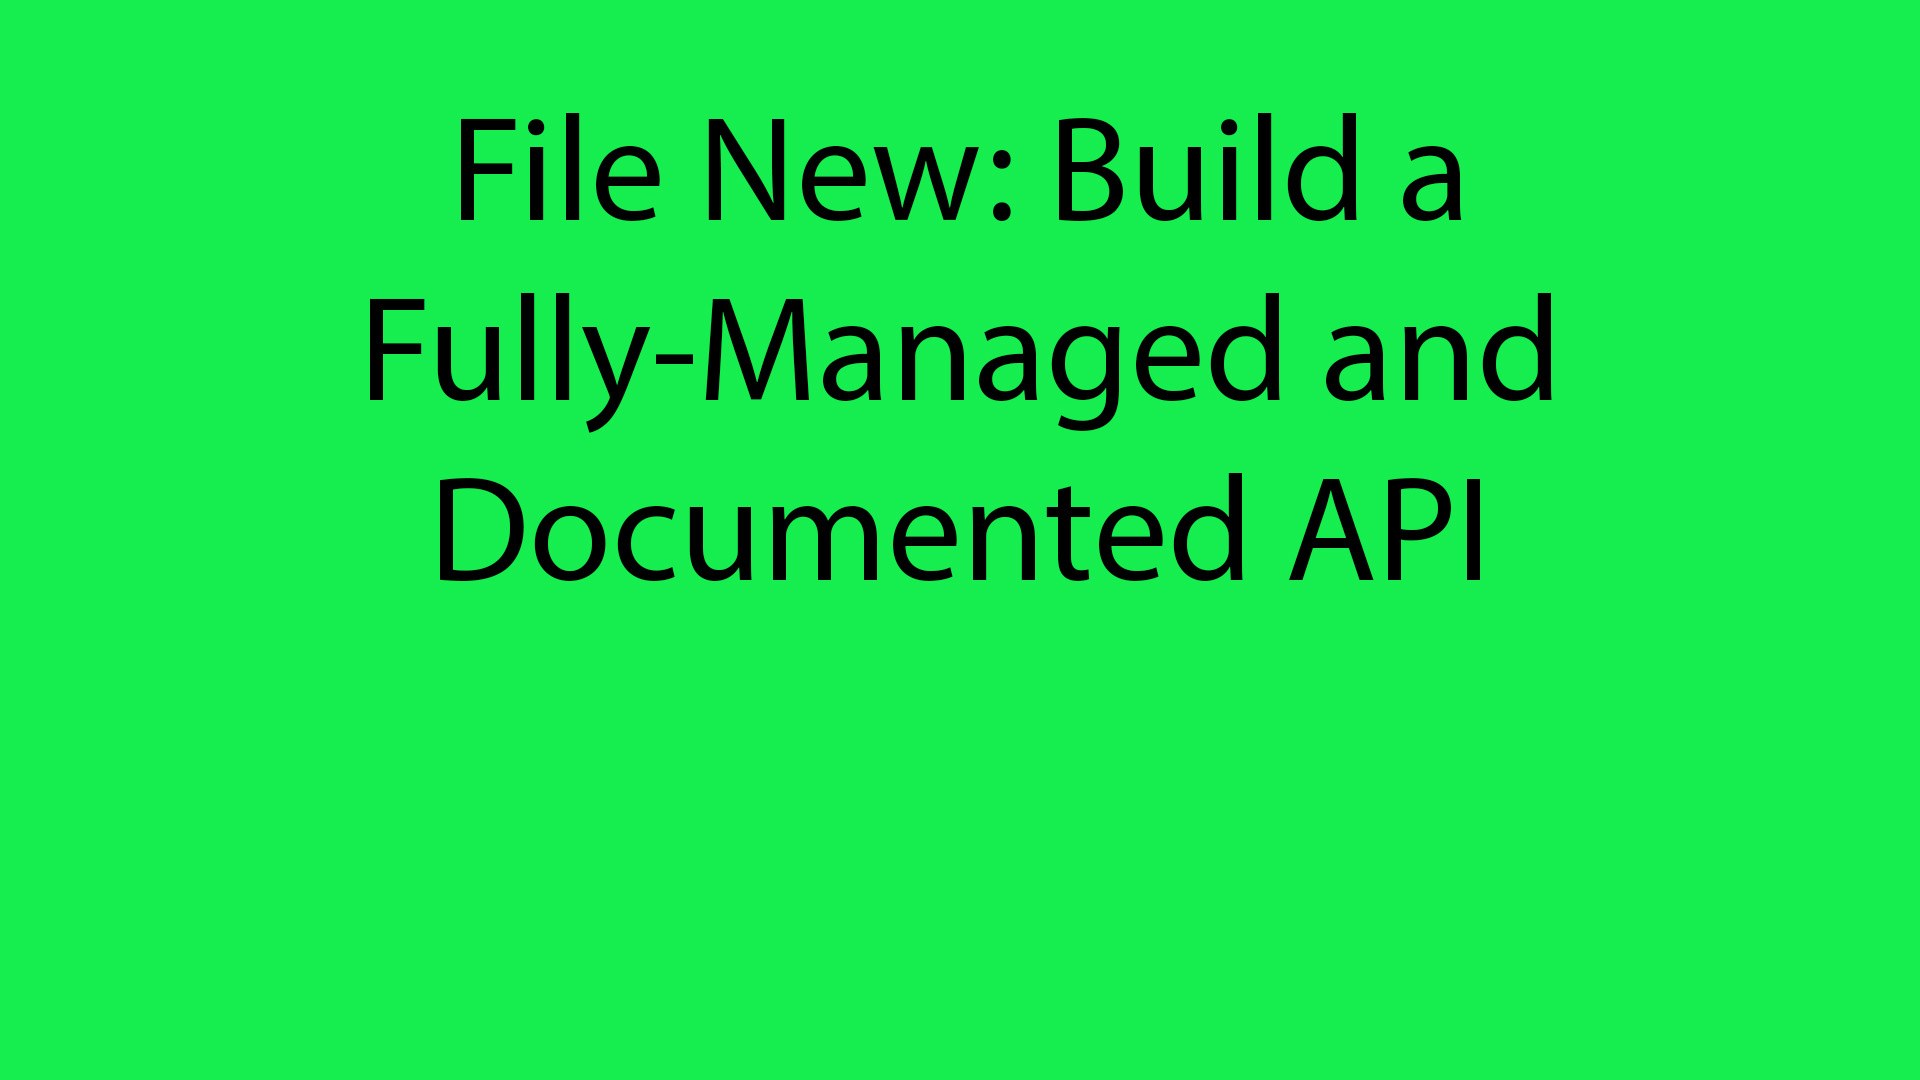 File New: Build a Fully-Managed and Documented API